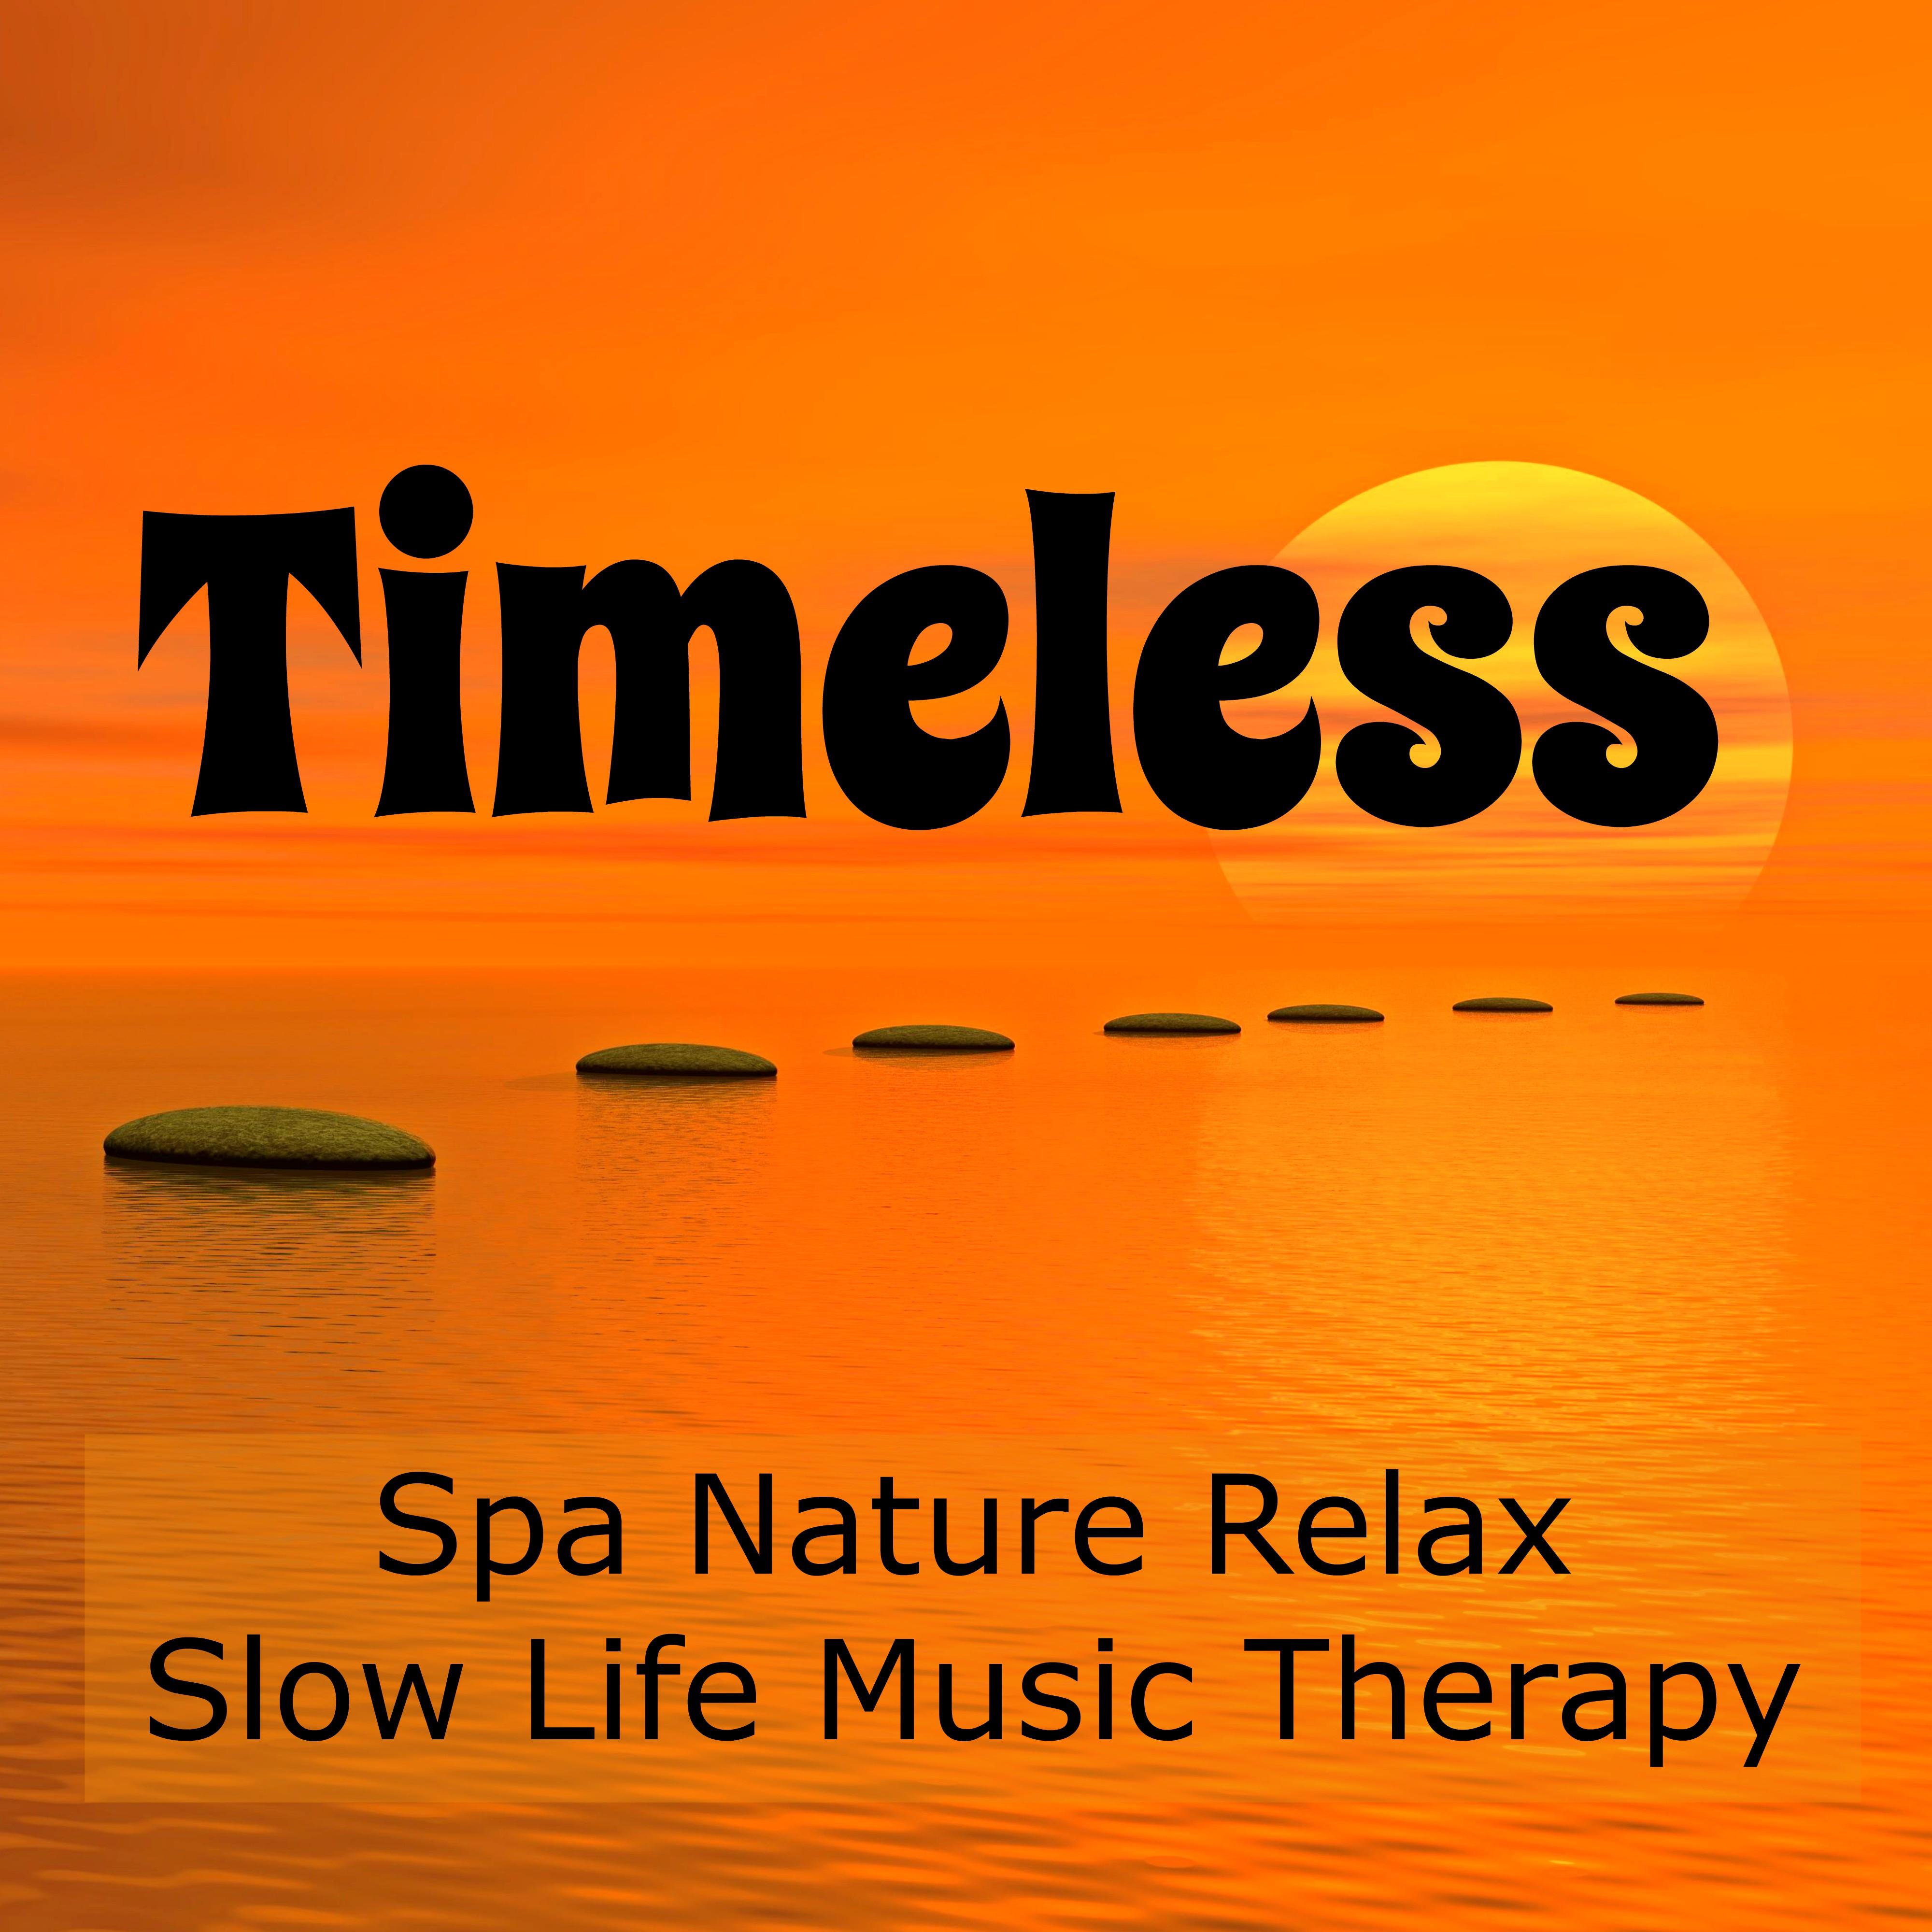 Timeless - Spa Nature Relax Slow Life Music Therapy for Best Healing Day with Soft Instrumental Natural Sounds